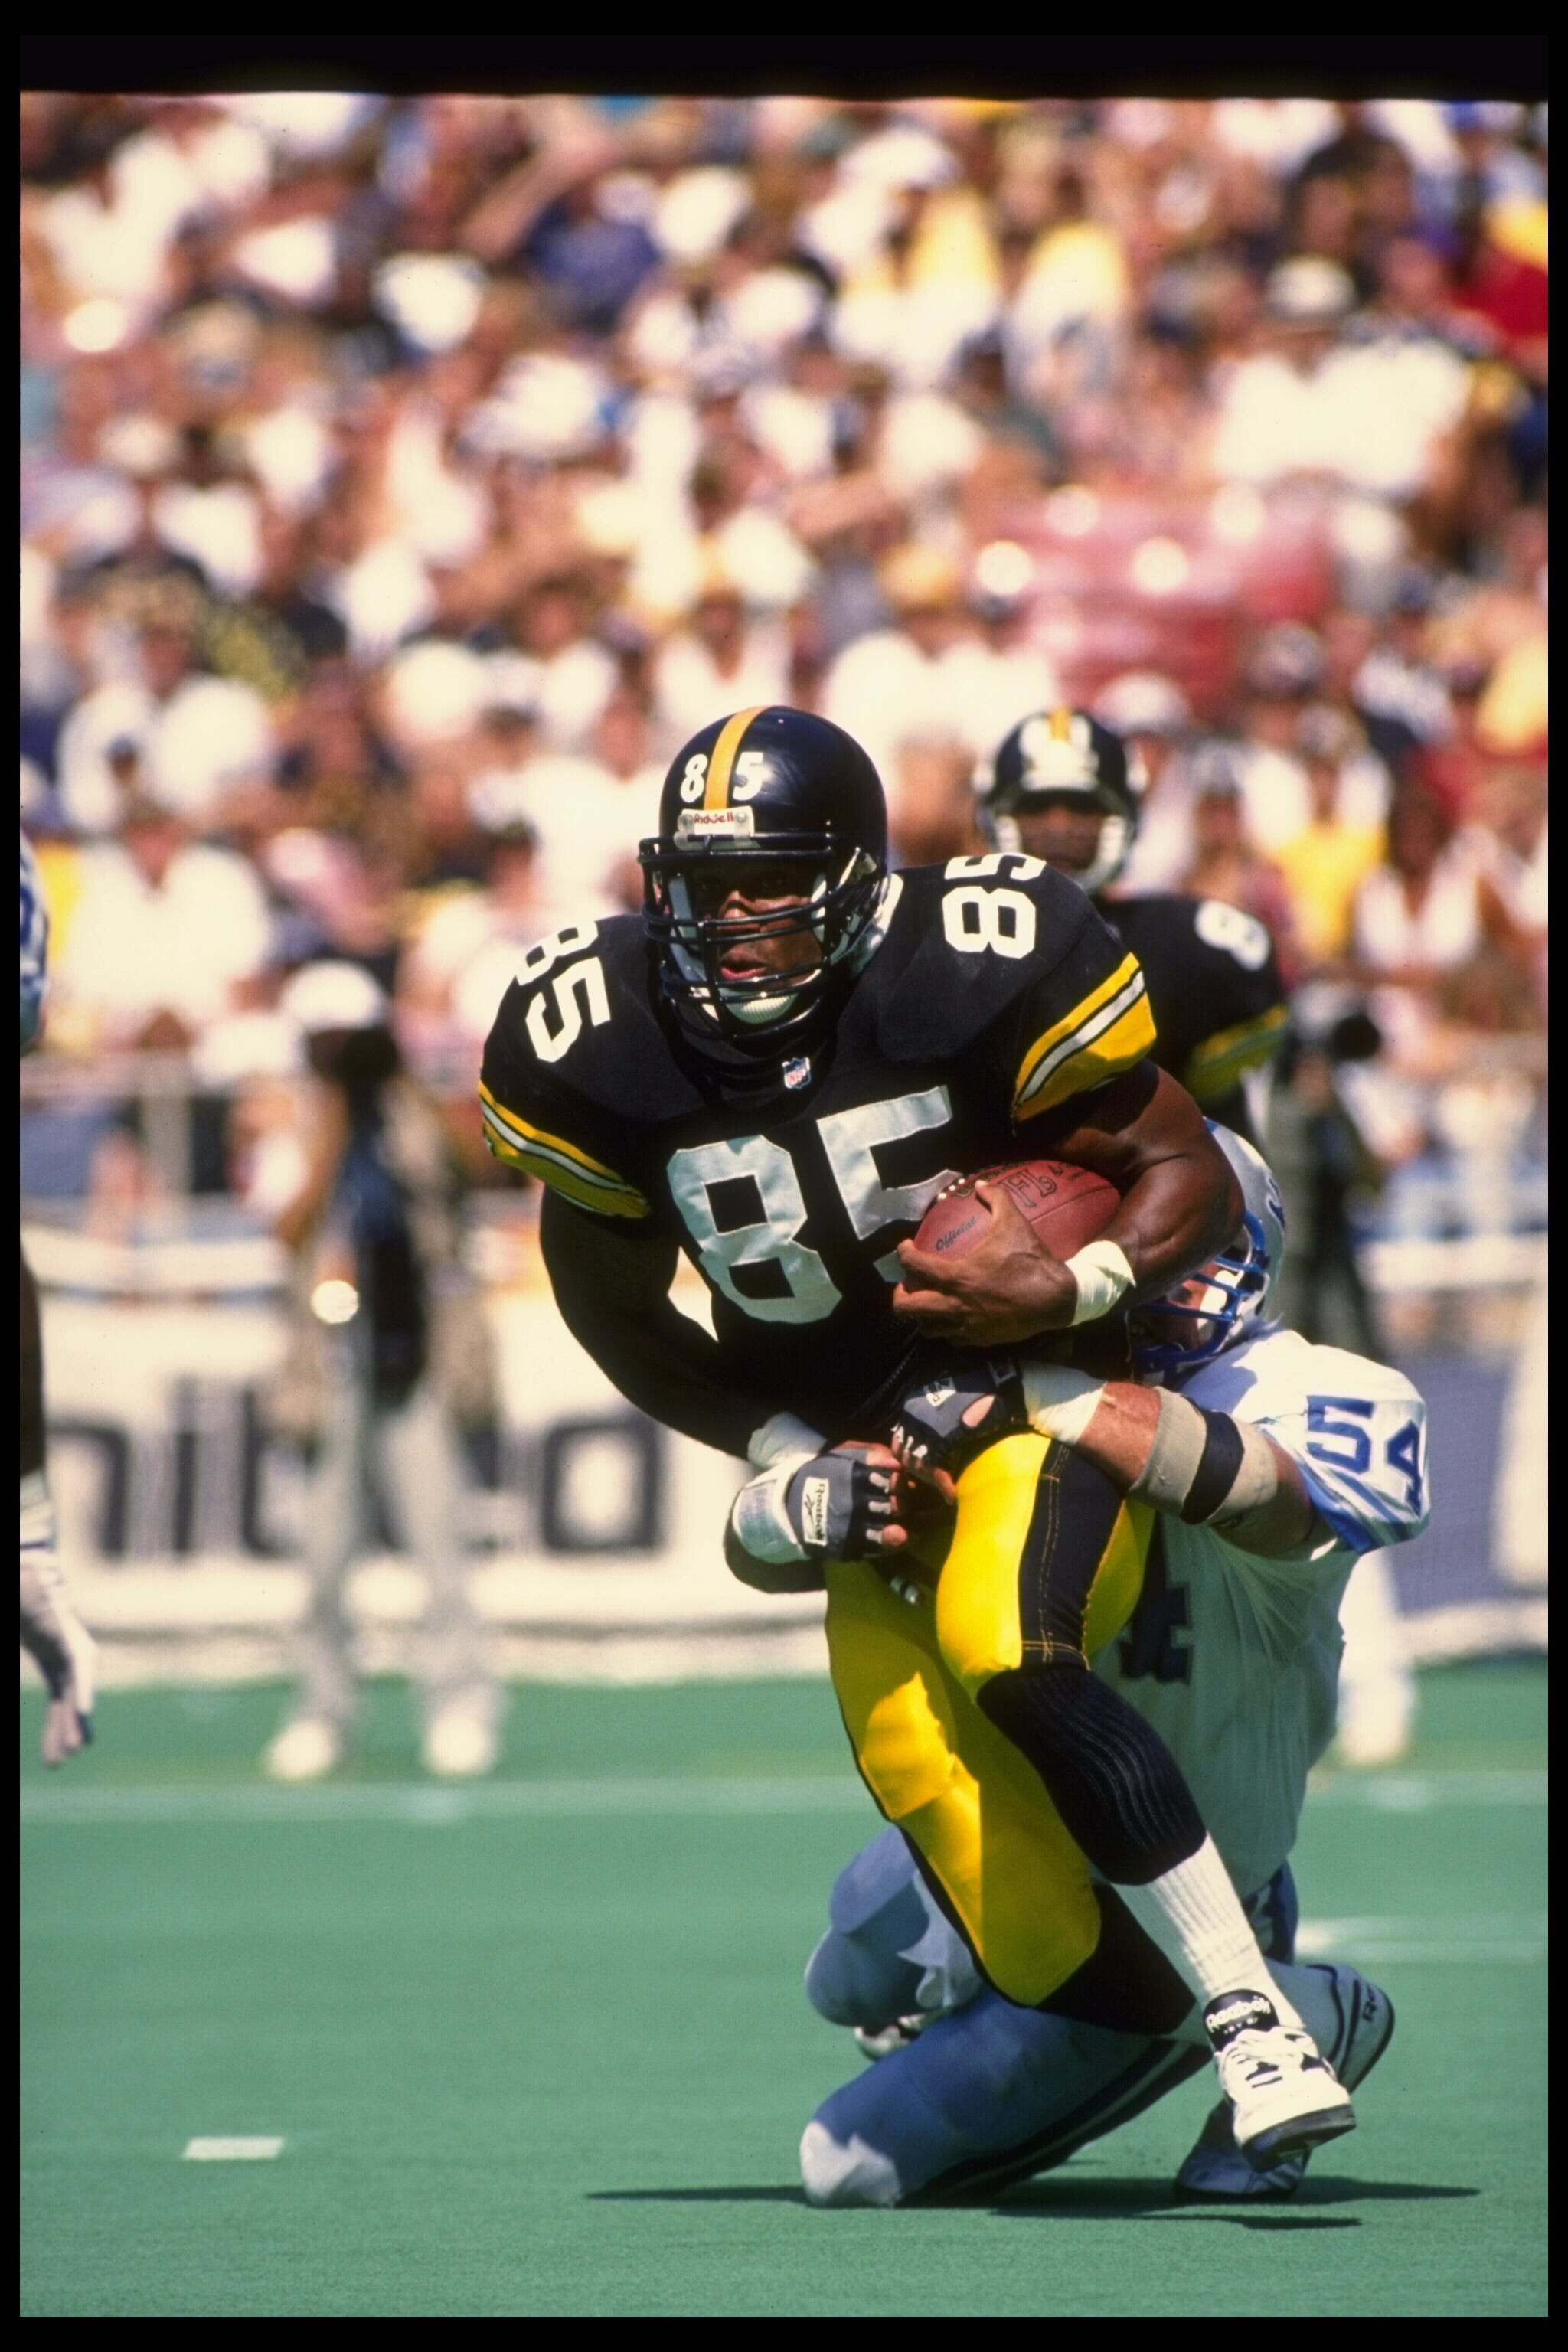 From 1995: Pittsburgh Steelers tight end Jonathan Hayes, a former Iowa Hawkeyes star, is brought down by Detroit Linebacker Chris Spielman.